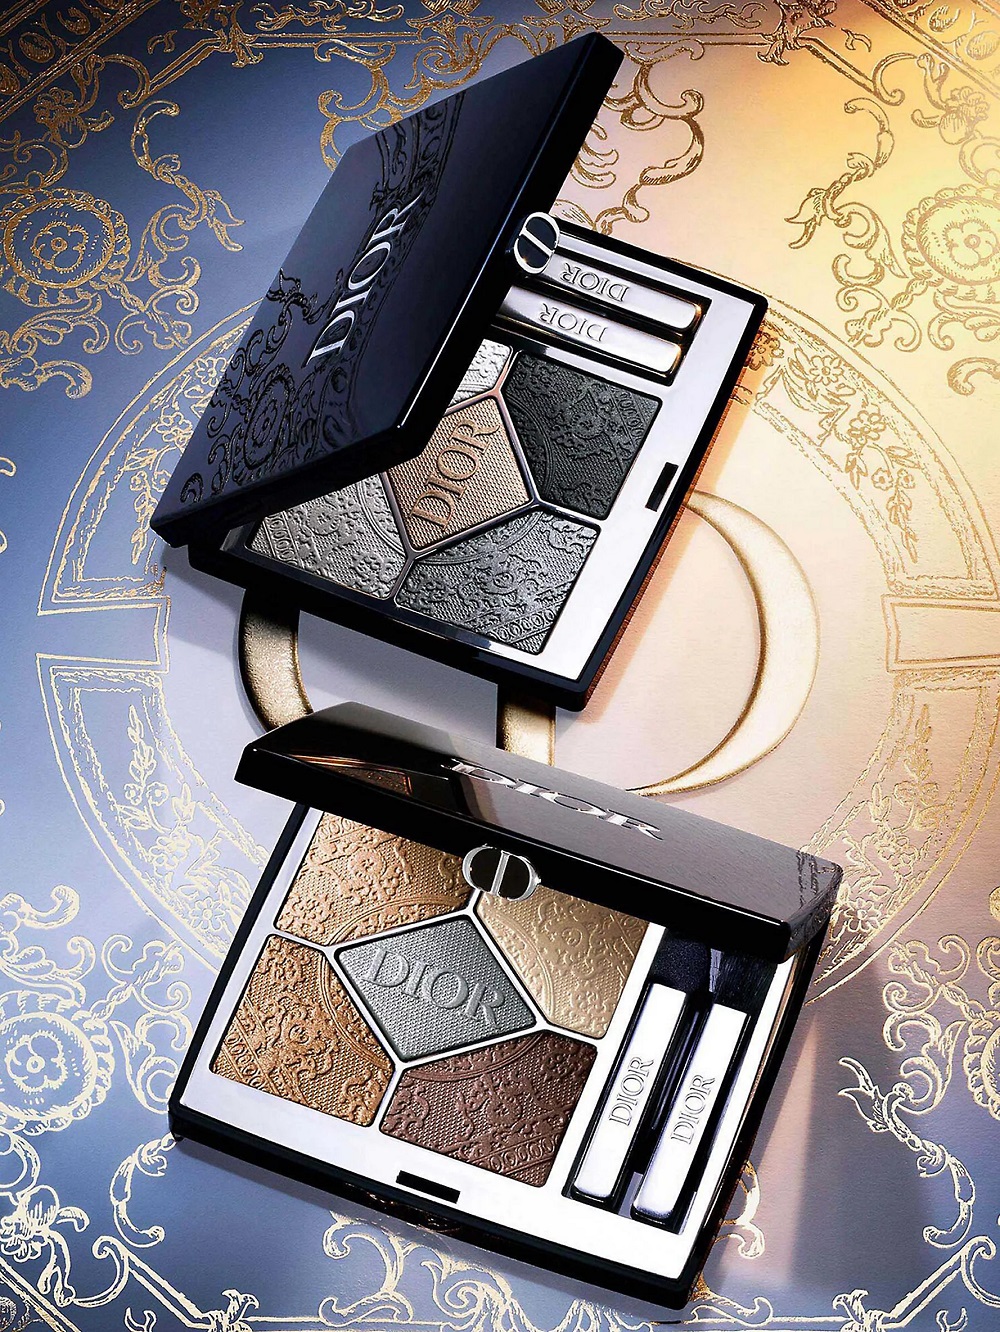 DIOR Diorshow 5 Couleurs limited-edition eyeshadow palette